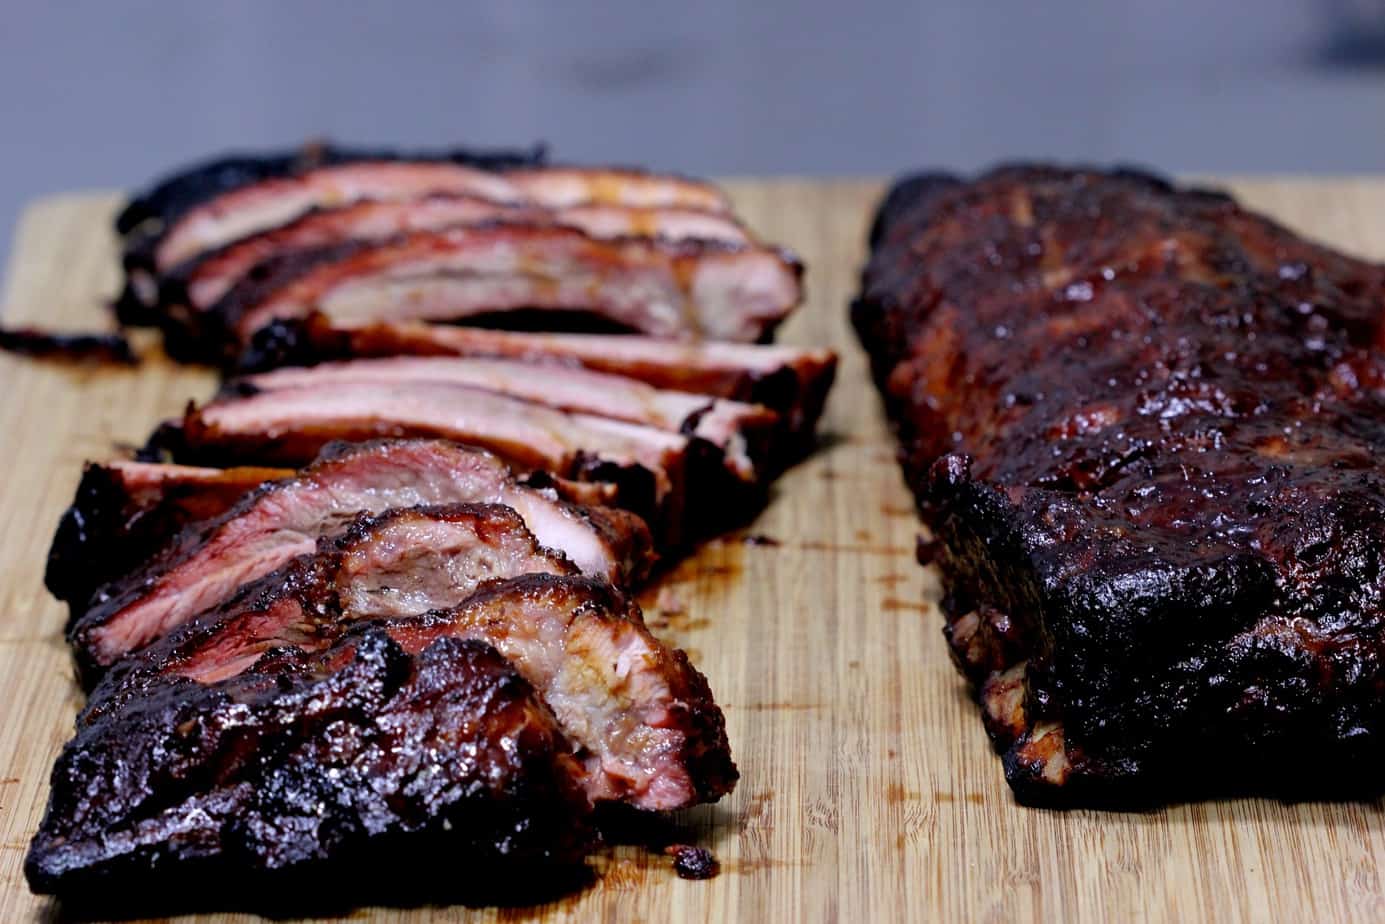 Pork Ribs Learn To Smoke Meat With Jeff Phillips,10th Anniversary Ideas